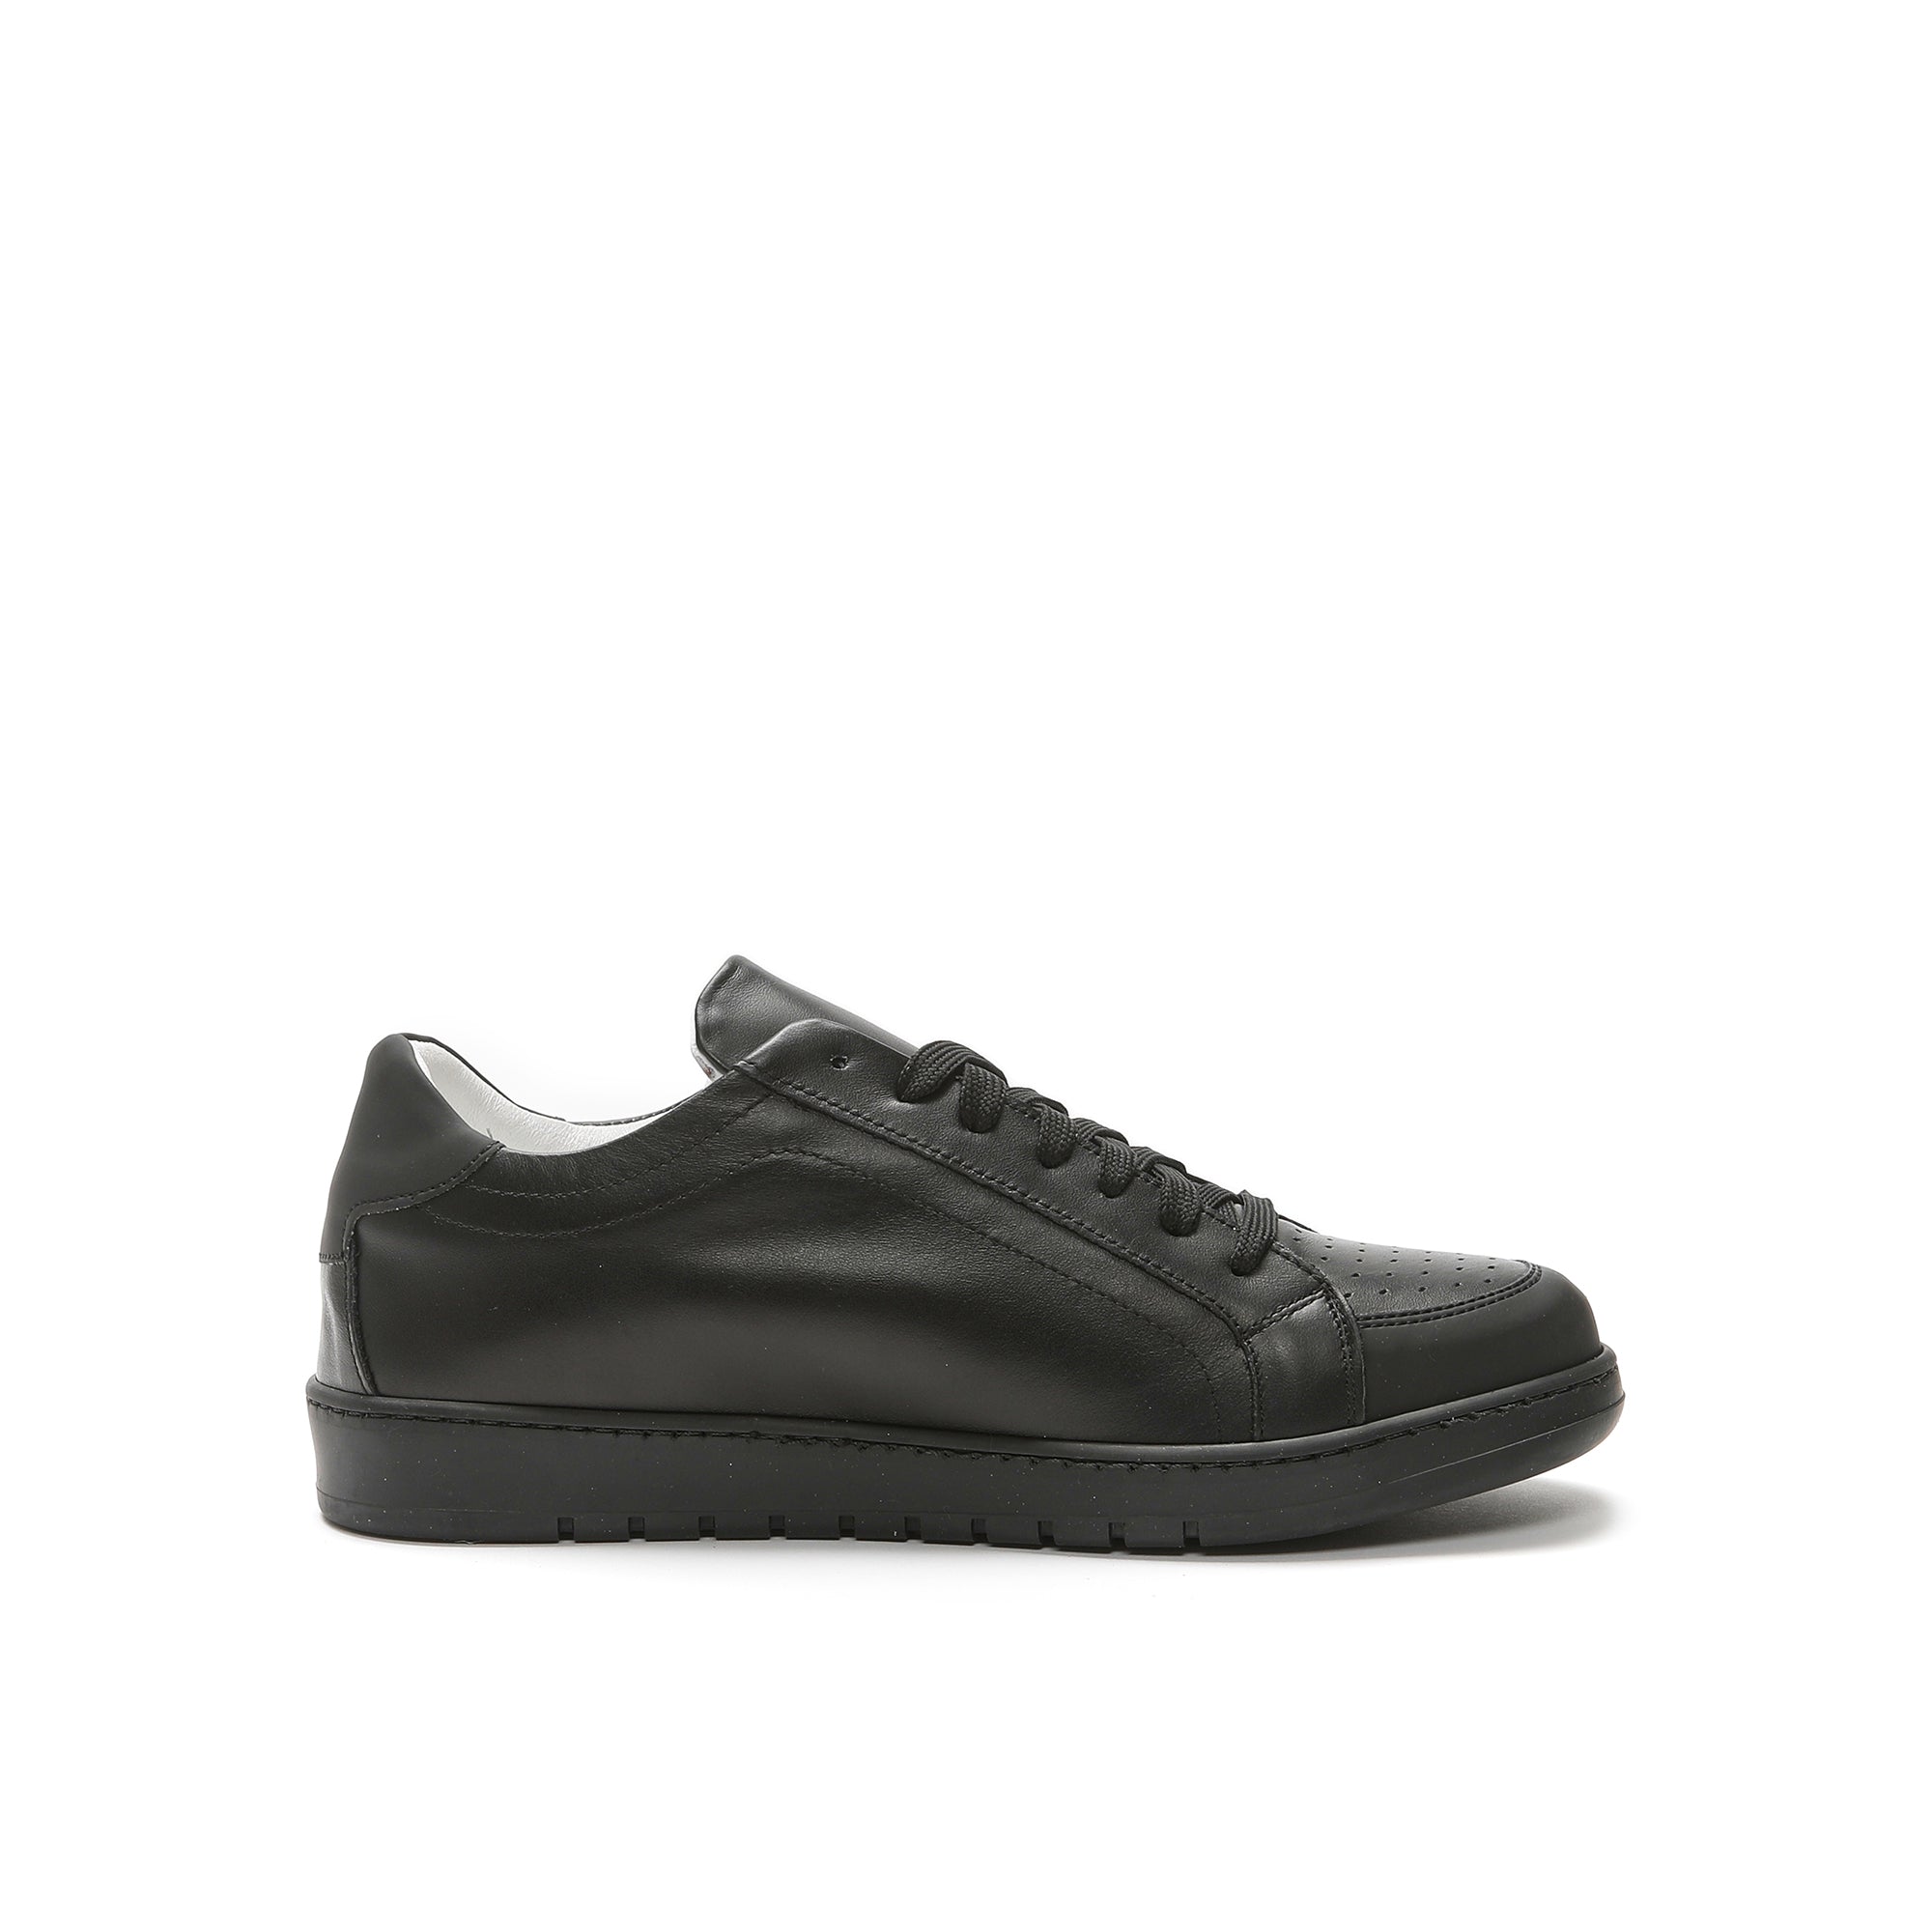 Lace-Up sneaker black